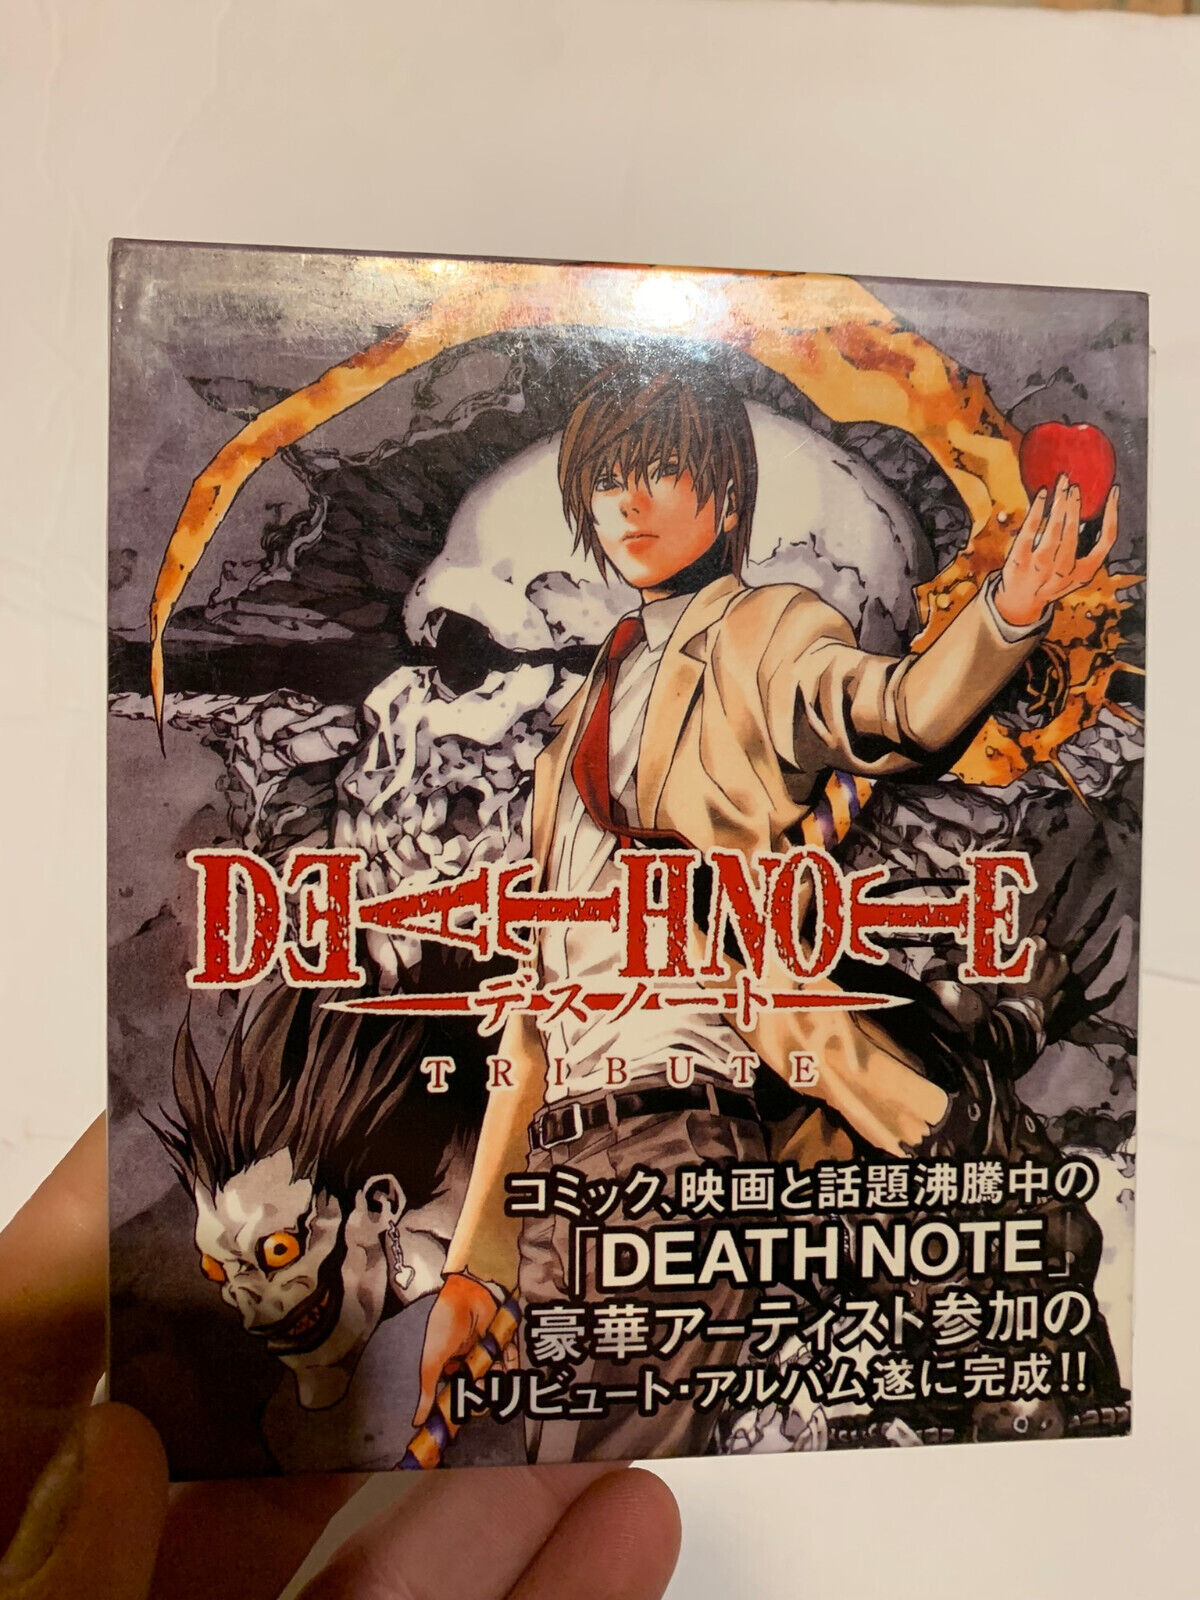 DEATH NOTE TV anime manga SOUNDTRACK CD Japanese  DEATH NOTE TRIBUTE